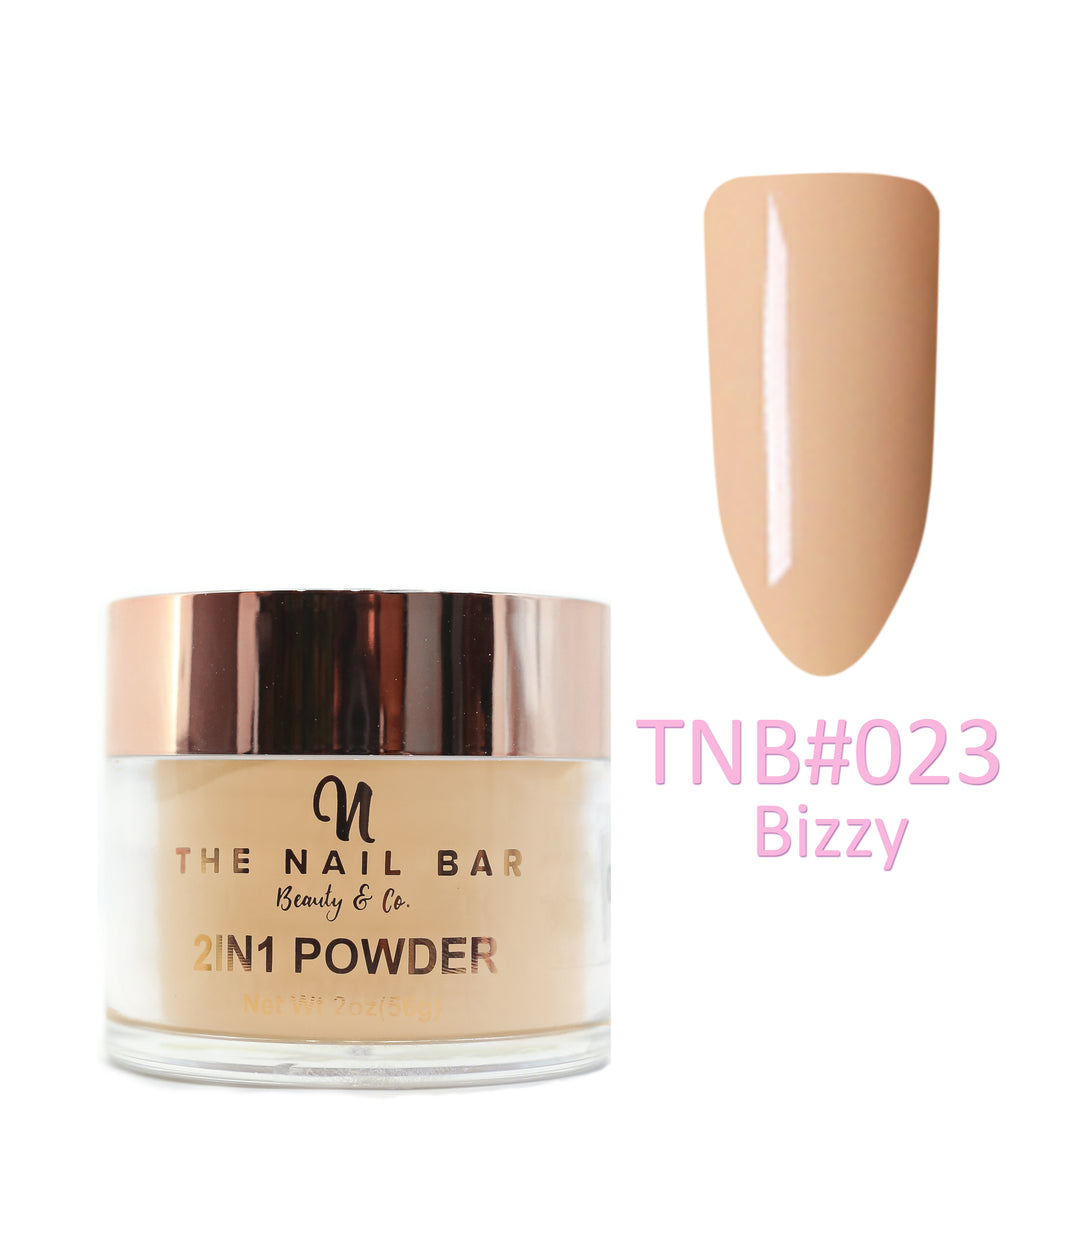 2-In-1 Dipping/Acrylic colour powder (2oz) -Bizzy - The Nail Bar Beauty & Co.